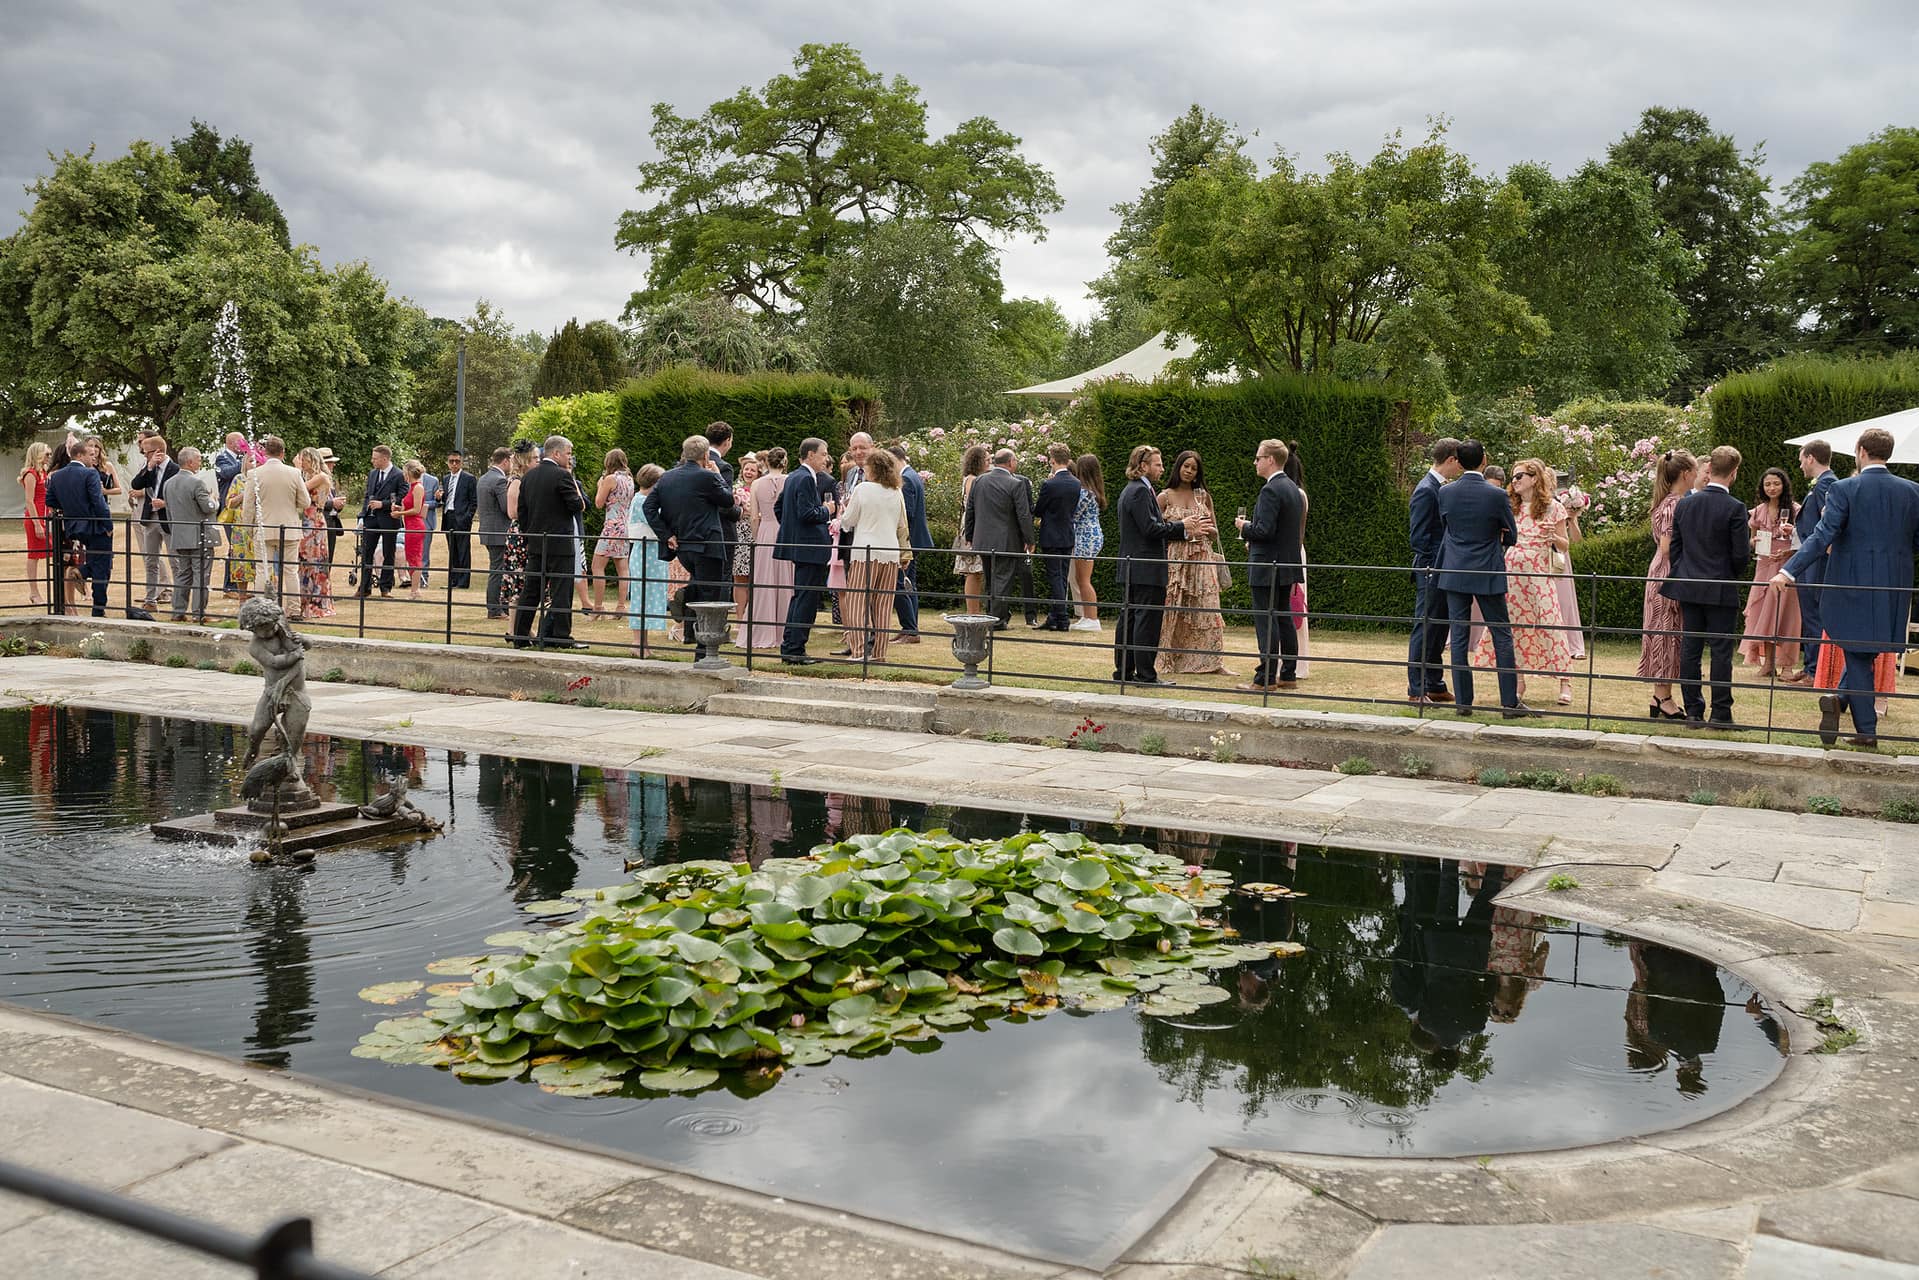 View of a wedding drinks reception across the lily pond at Courteenhall